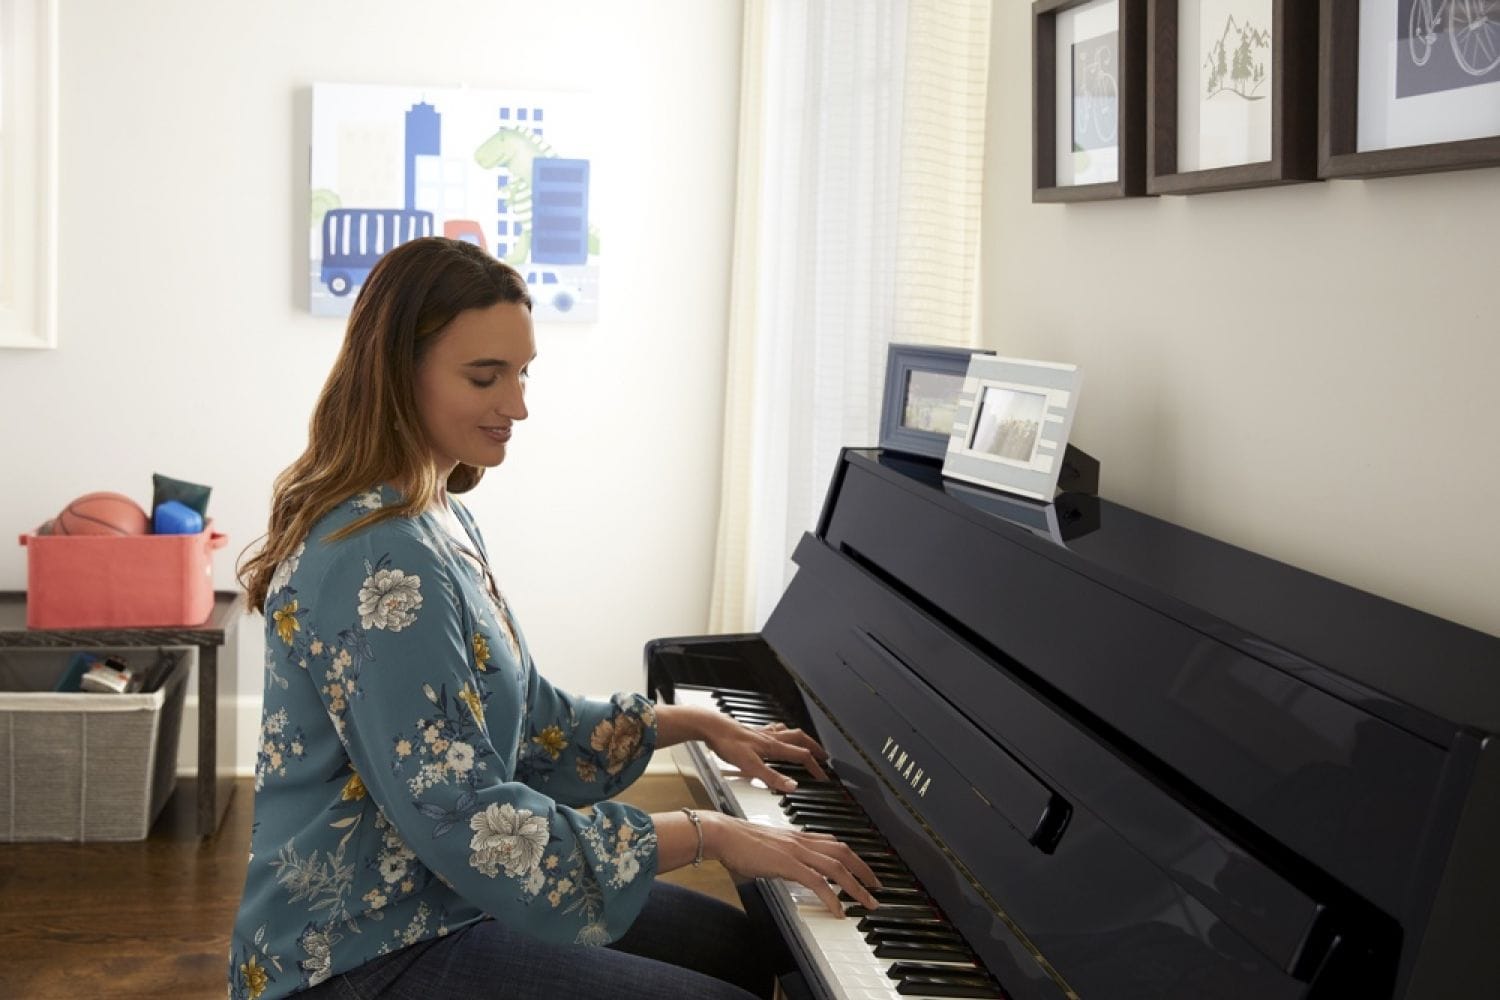 A woman approximately 30 years old with long hair and dressed casually smiling while she plays an upright piano with a lower profile back in what appears to be a kids' playroom in a home. There are kids drawings and toys in baskets in background and family pictures framed sitting on the back of piano.